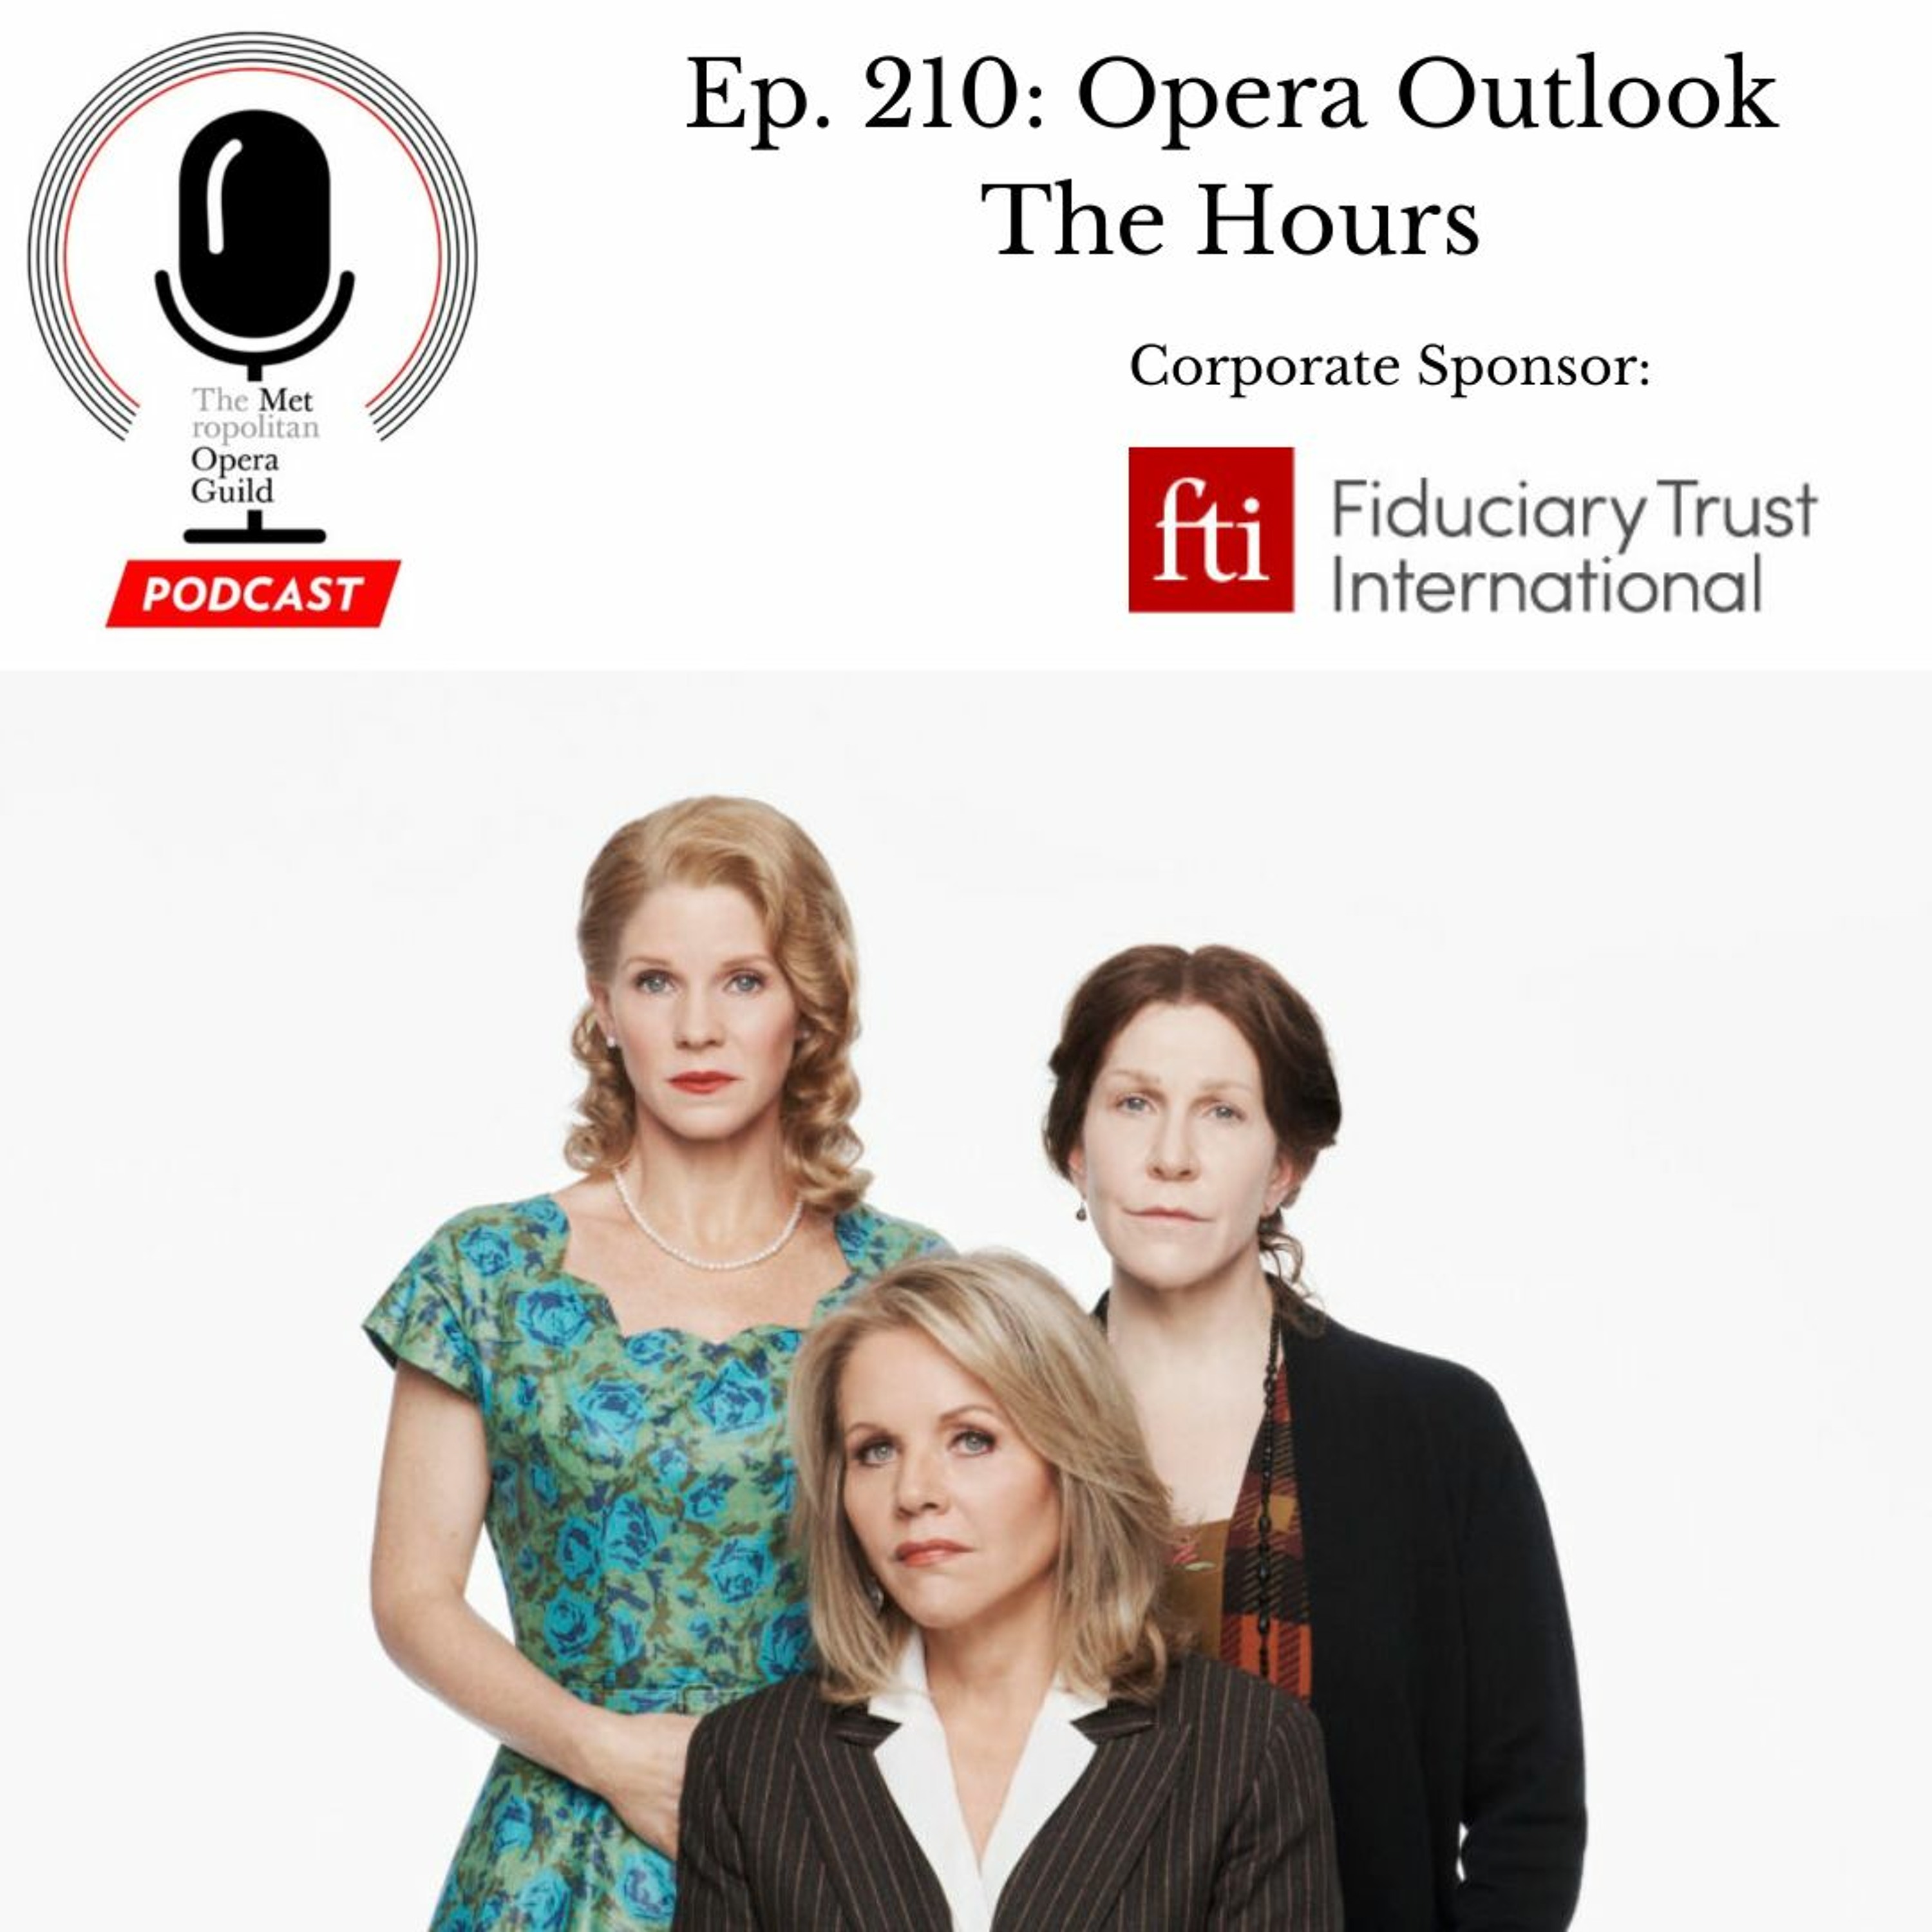 Ep. 210: Opera Outlook The Hours